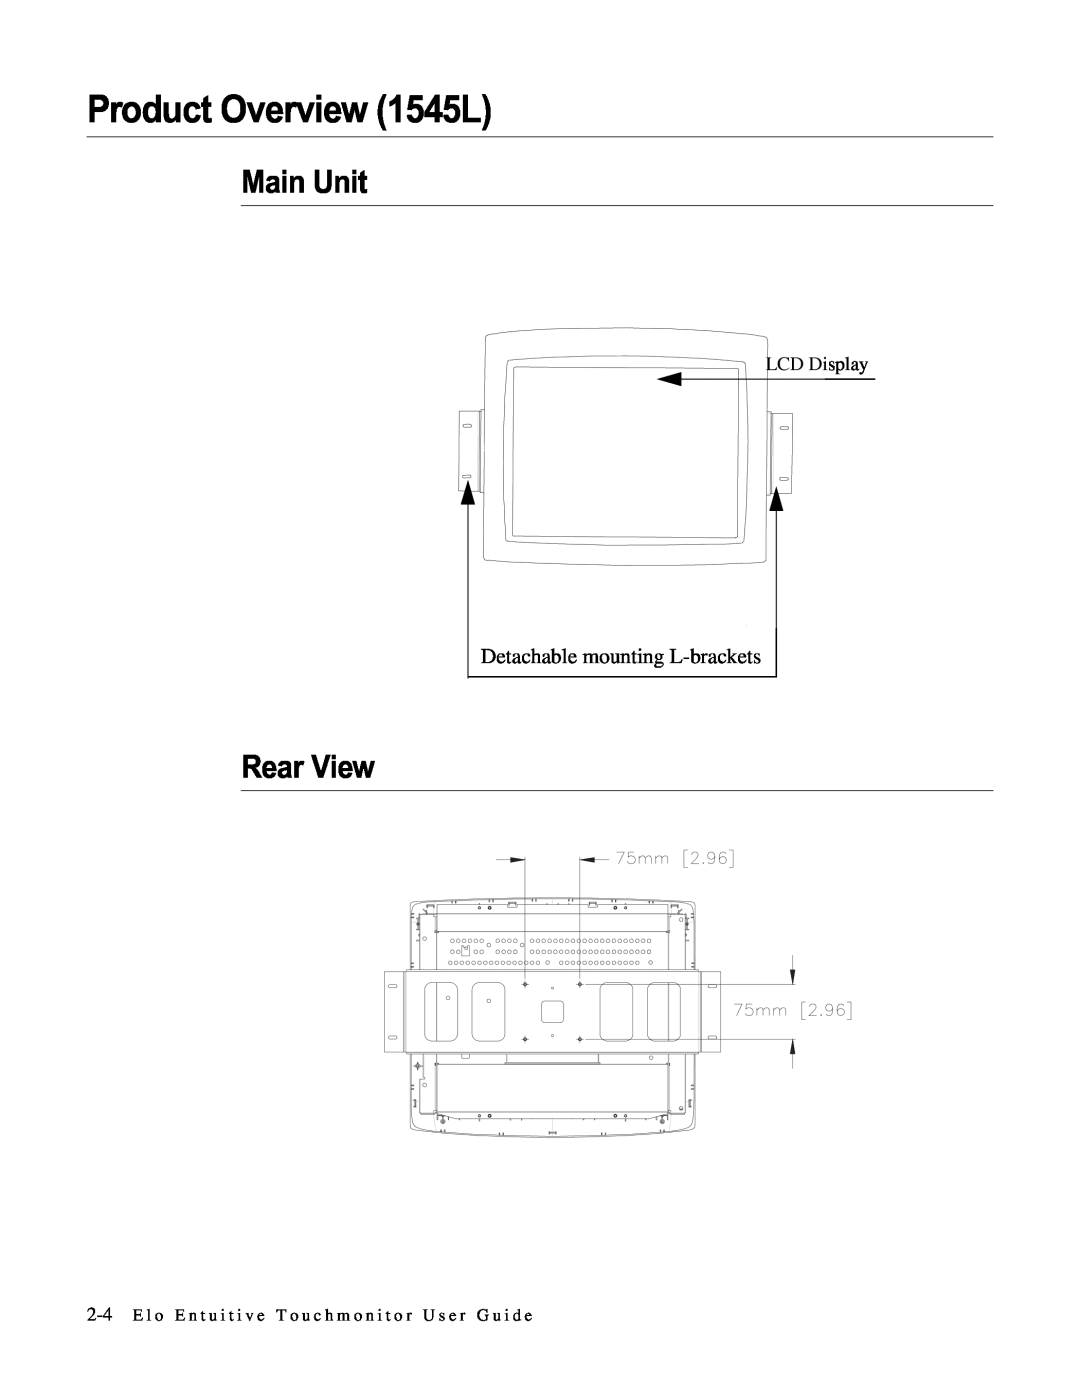 Elo TouchSystems LCD manual Product Overview 1545L, Main Unit, Rear View, Detachable mounting L-brackets 